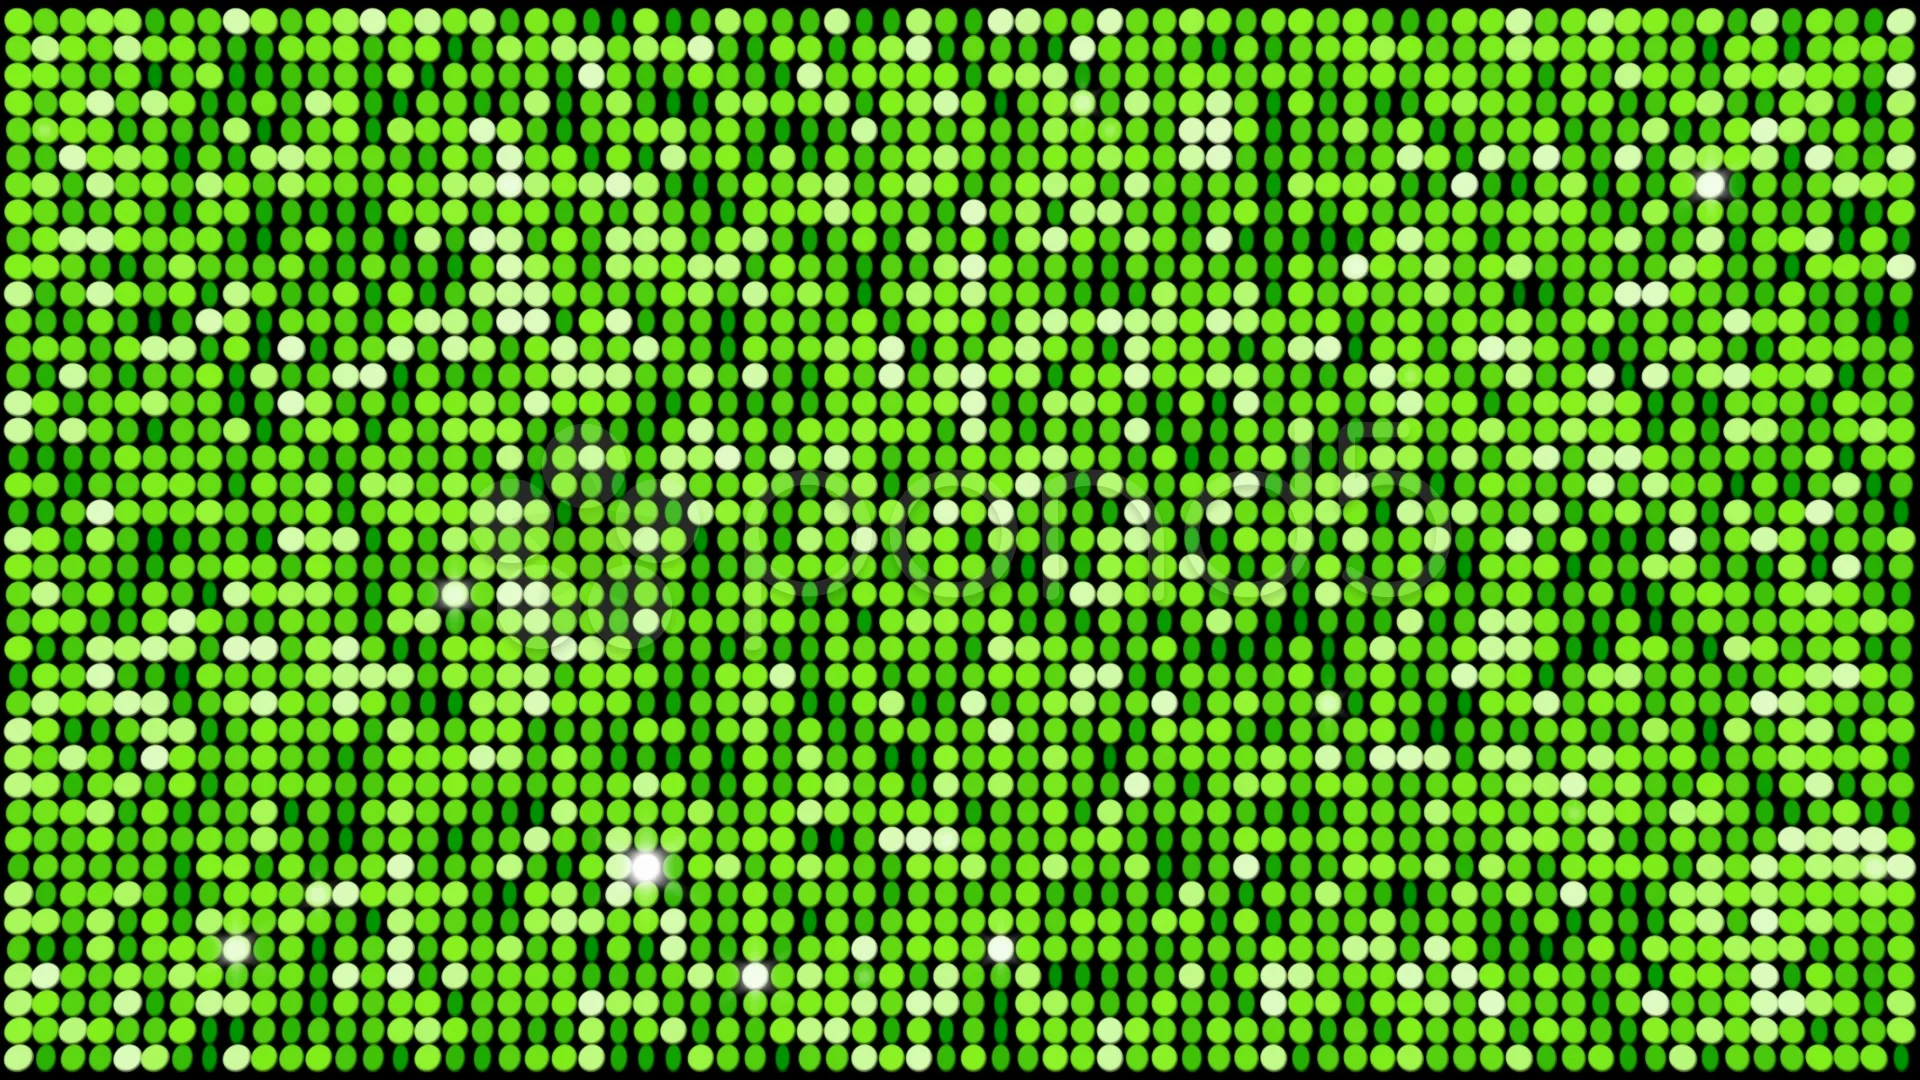 sparkly green wallpaper